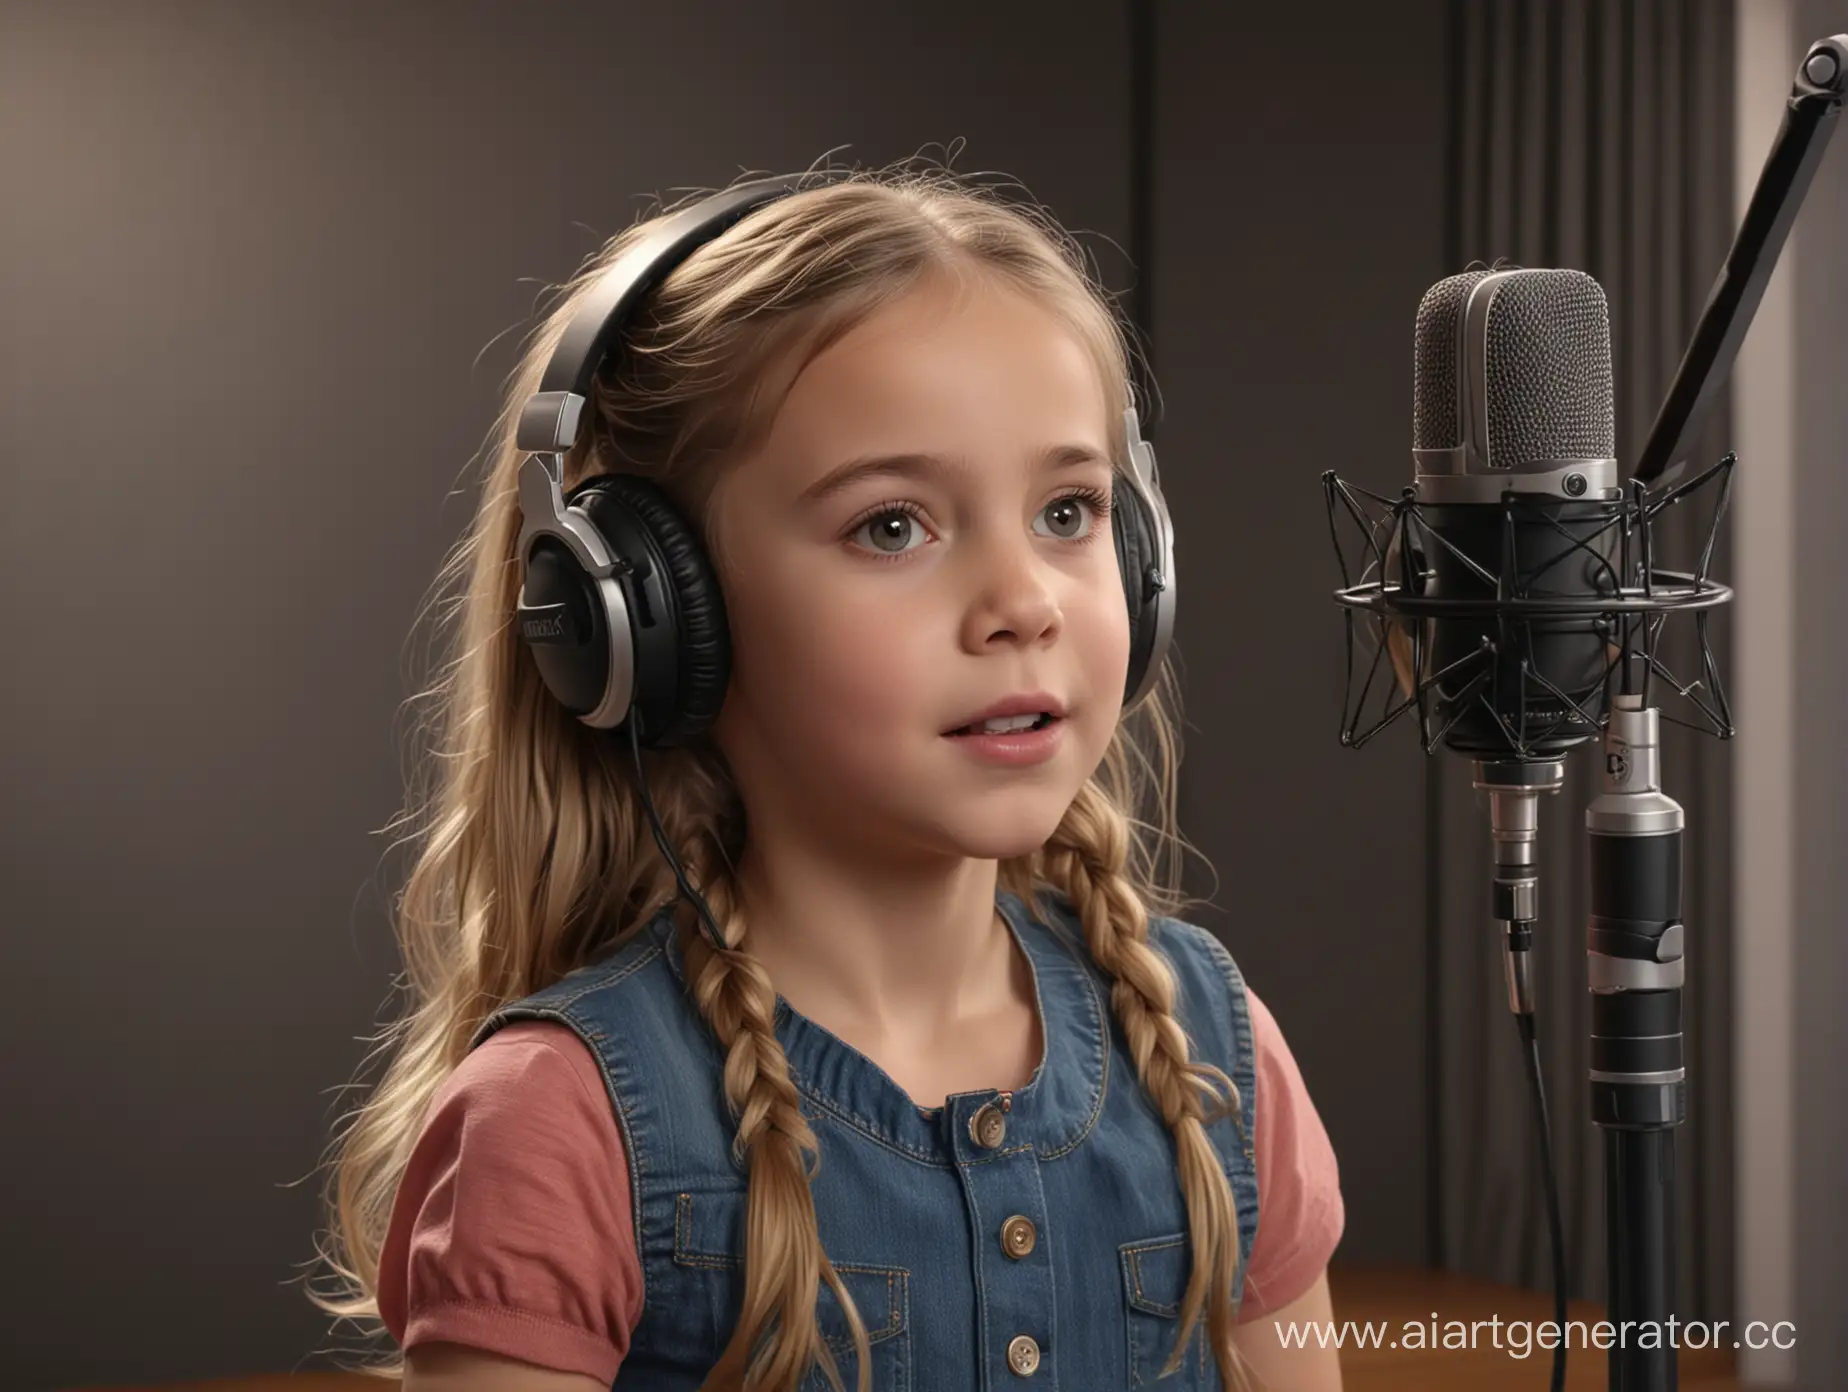 Young-Girl-Recording-in-High-Definition-Studio-Microphone